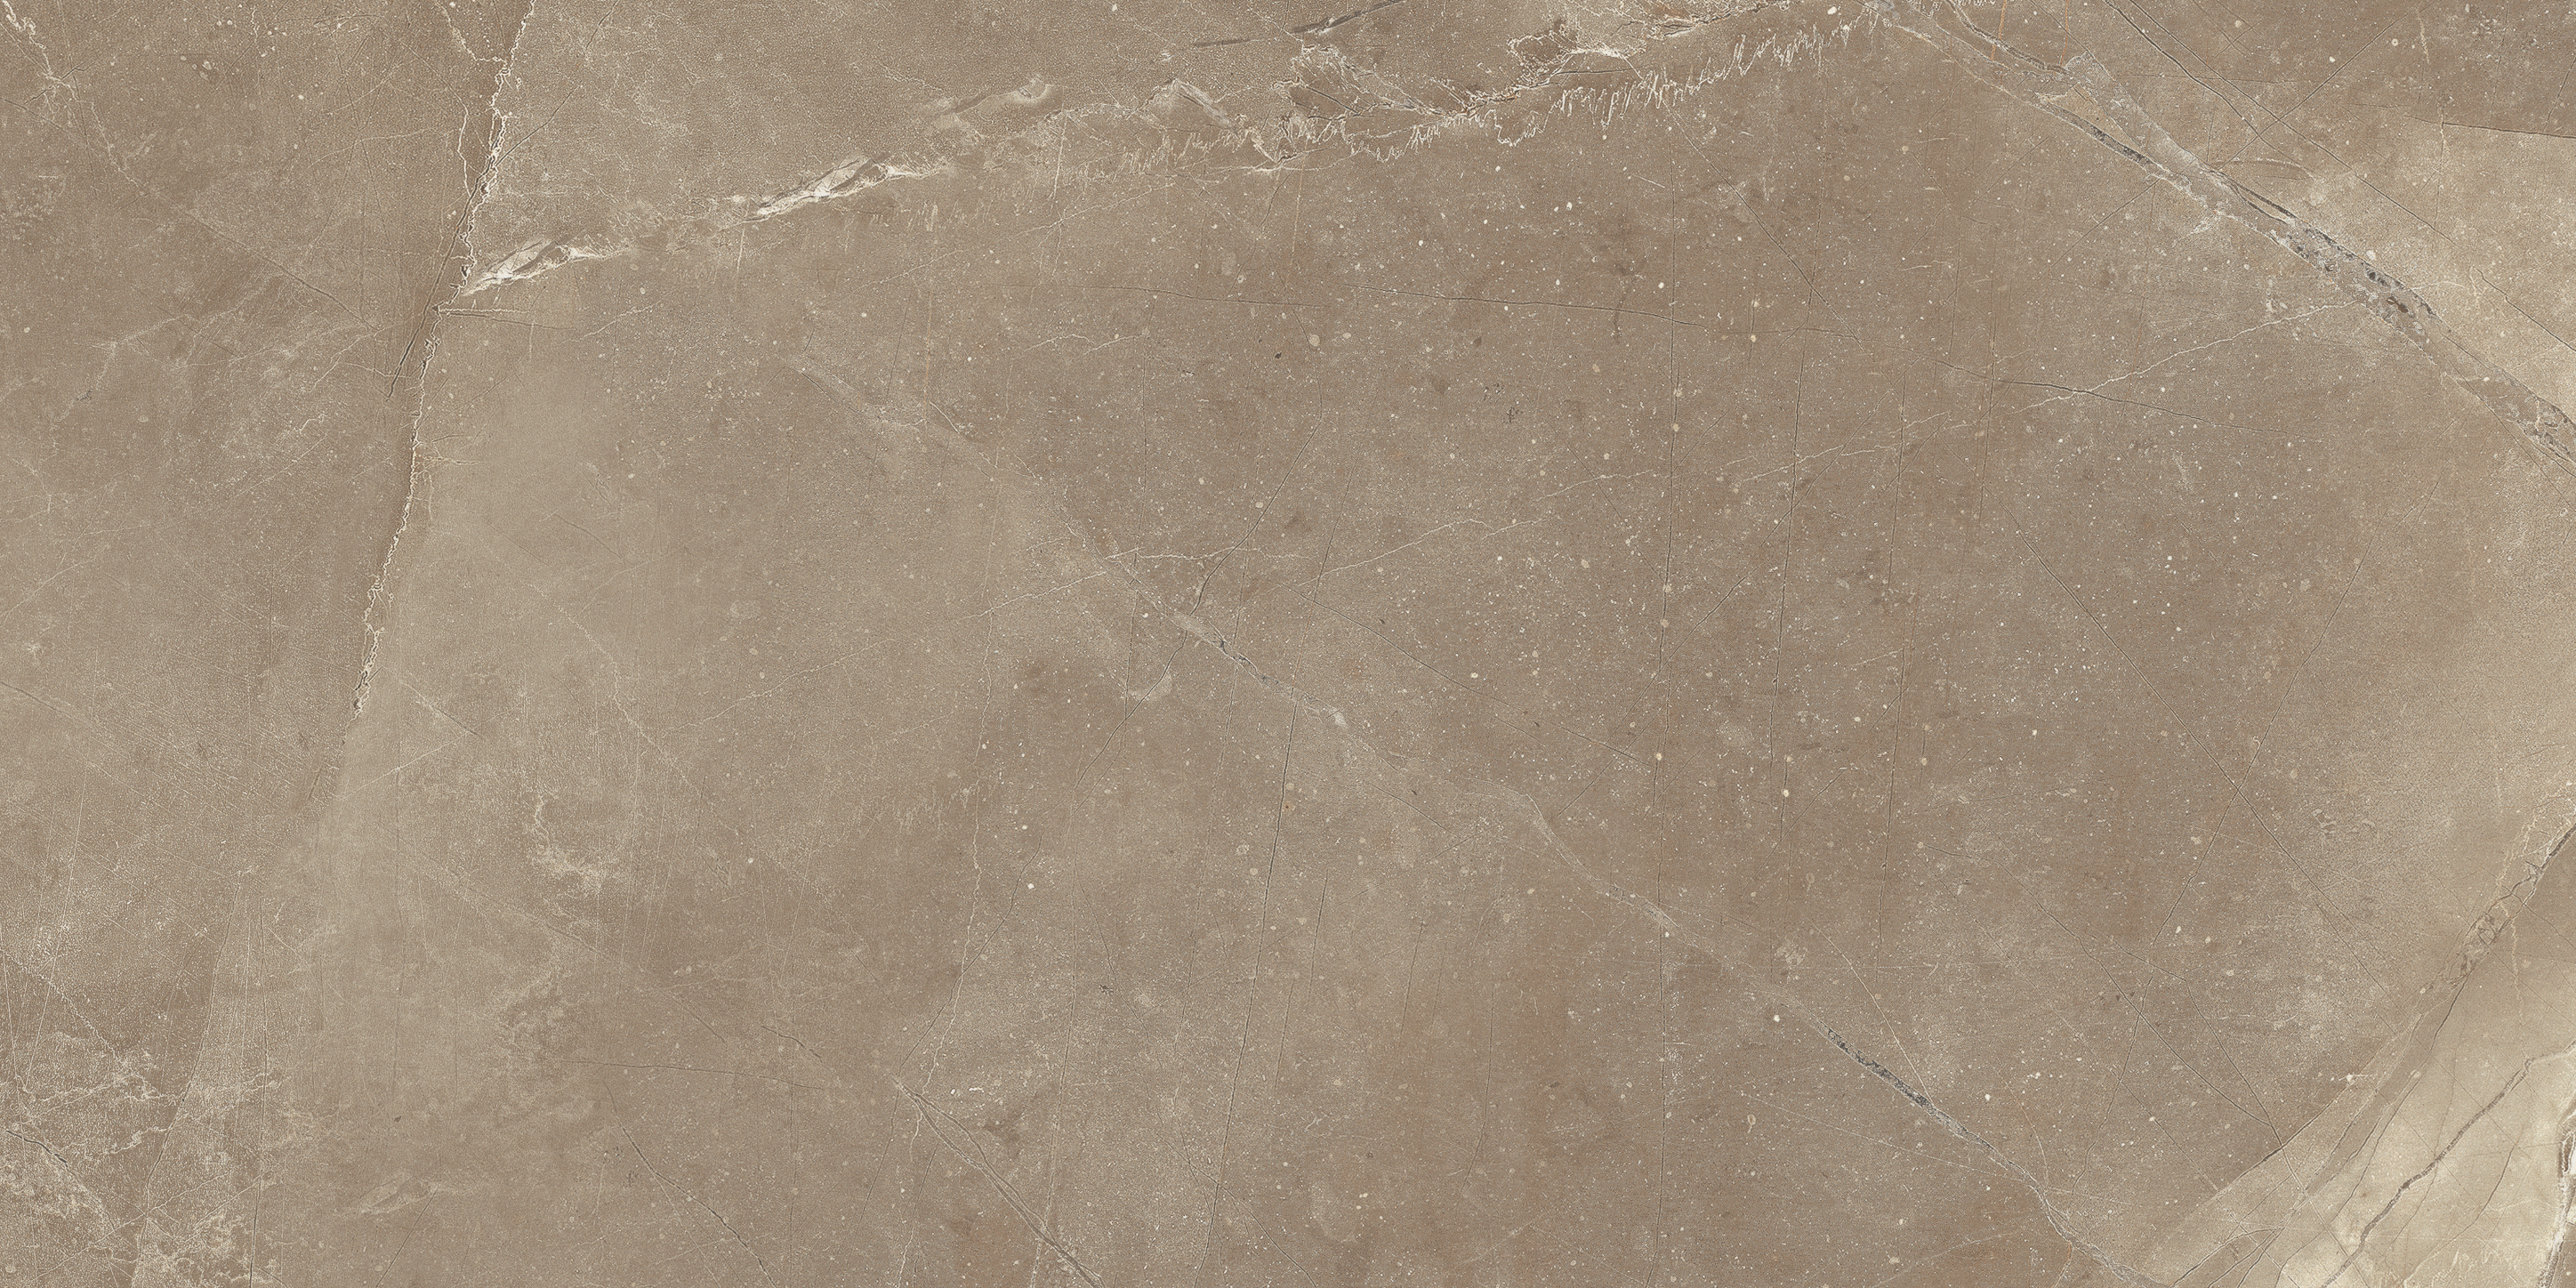 pulpis moca pattern glazed porcelain field tile from classic anatolia collection distributed by surface group international matte finish pressed edge 12x24 rectangle shape